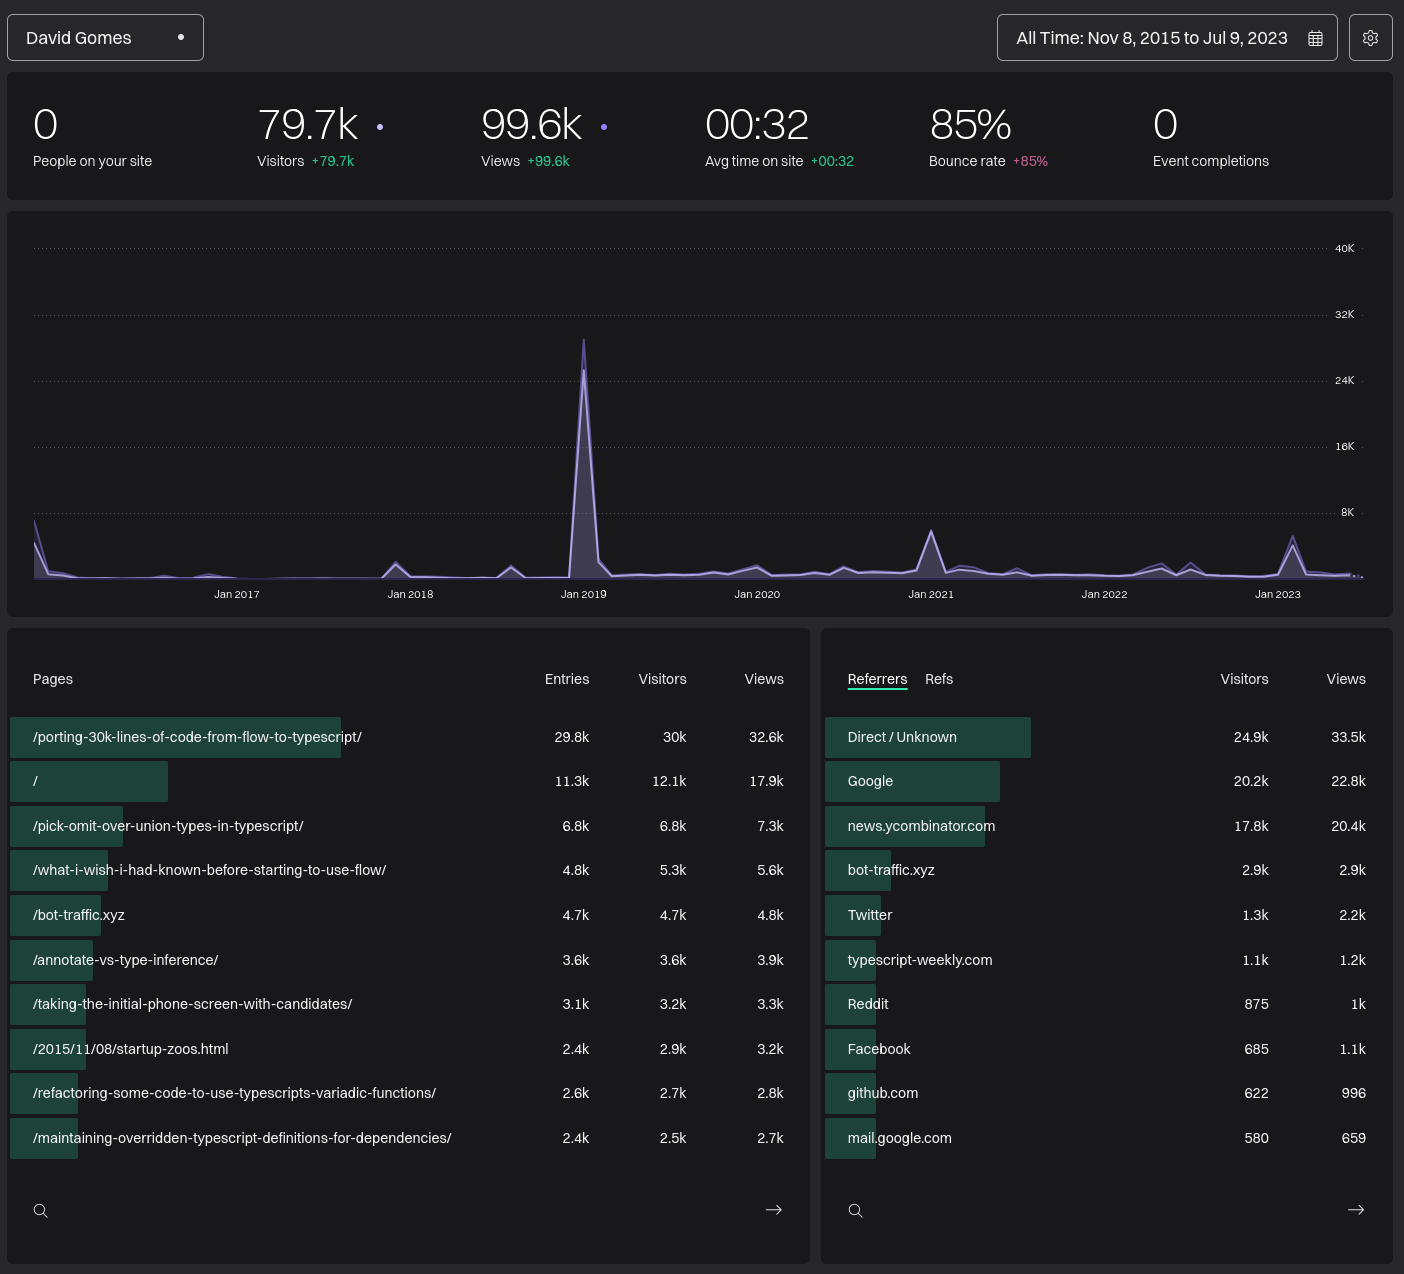 My view of the Fathom dashboard